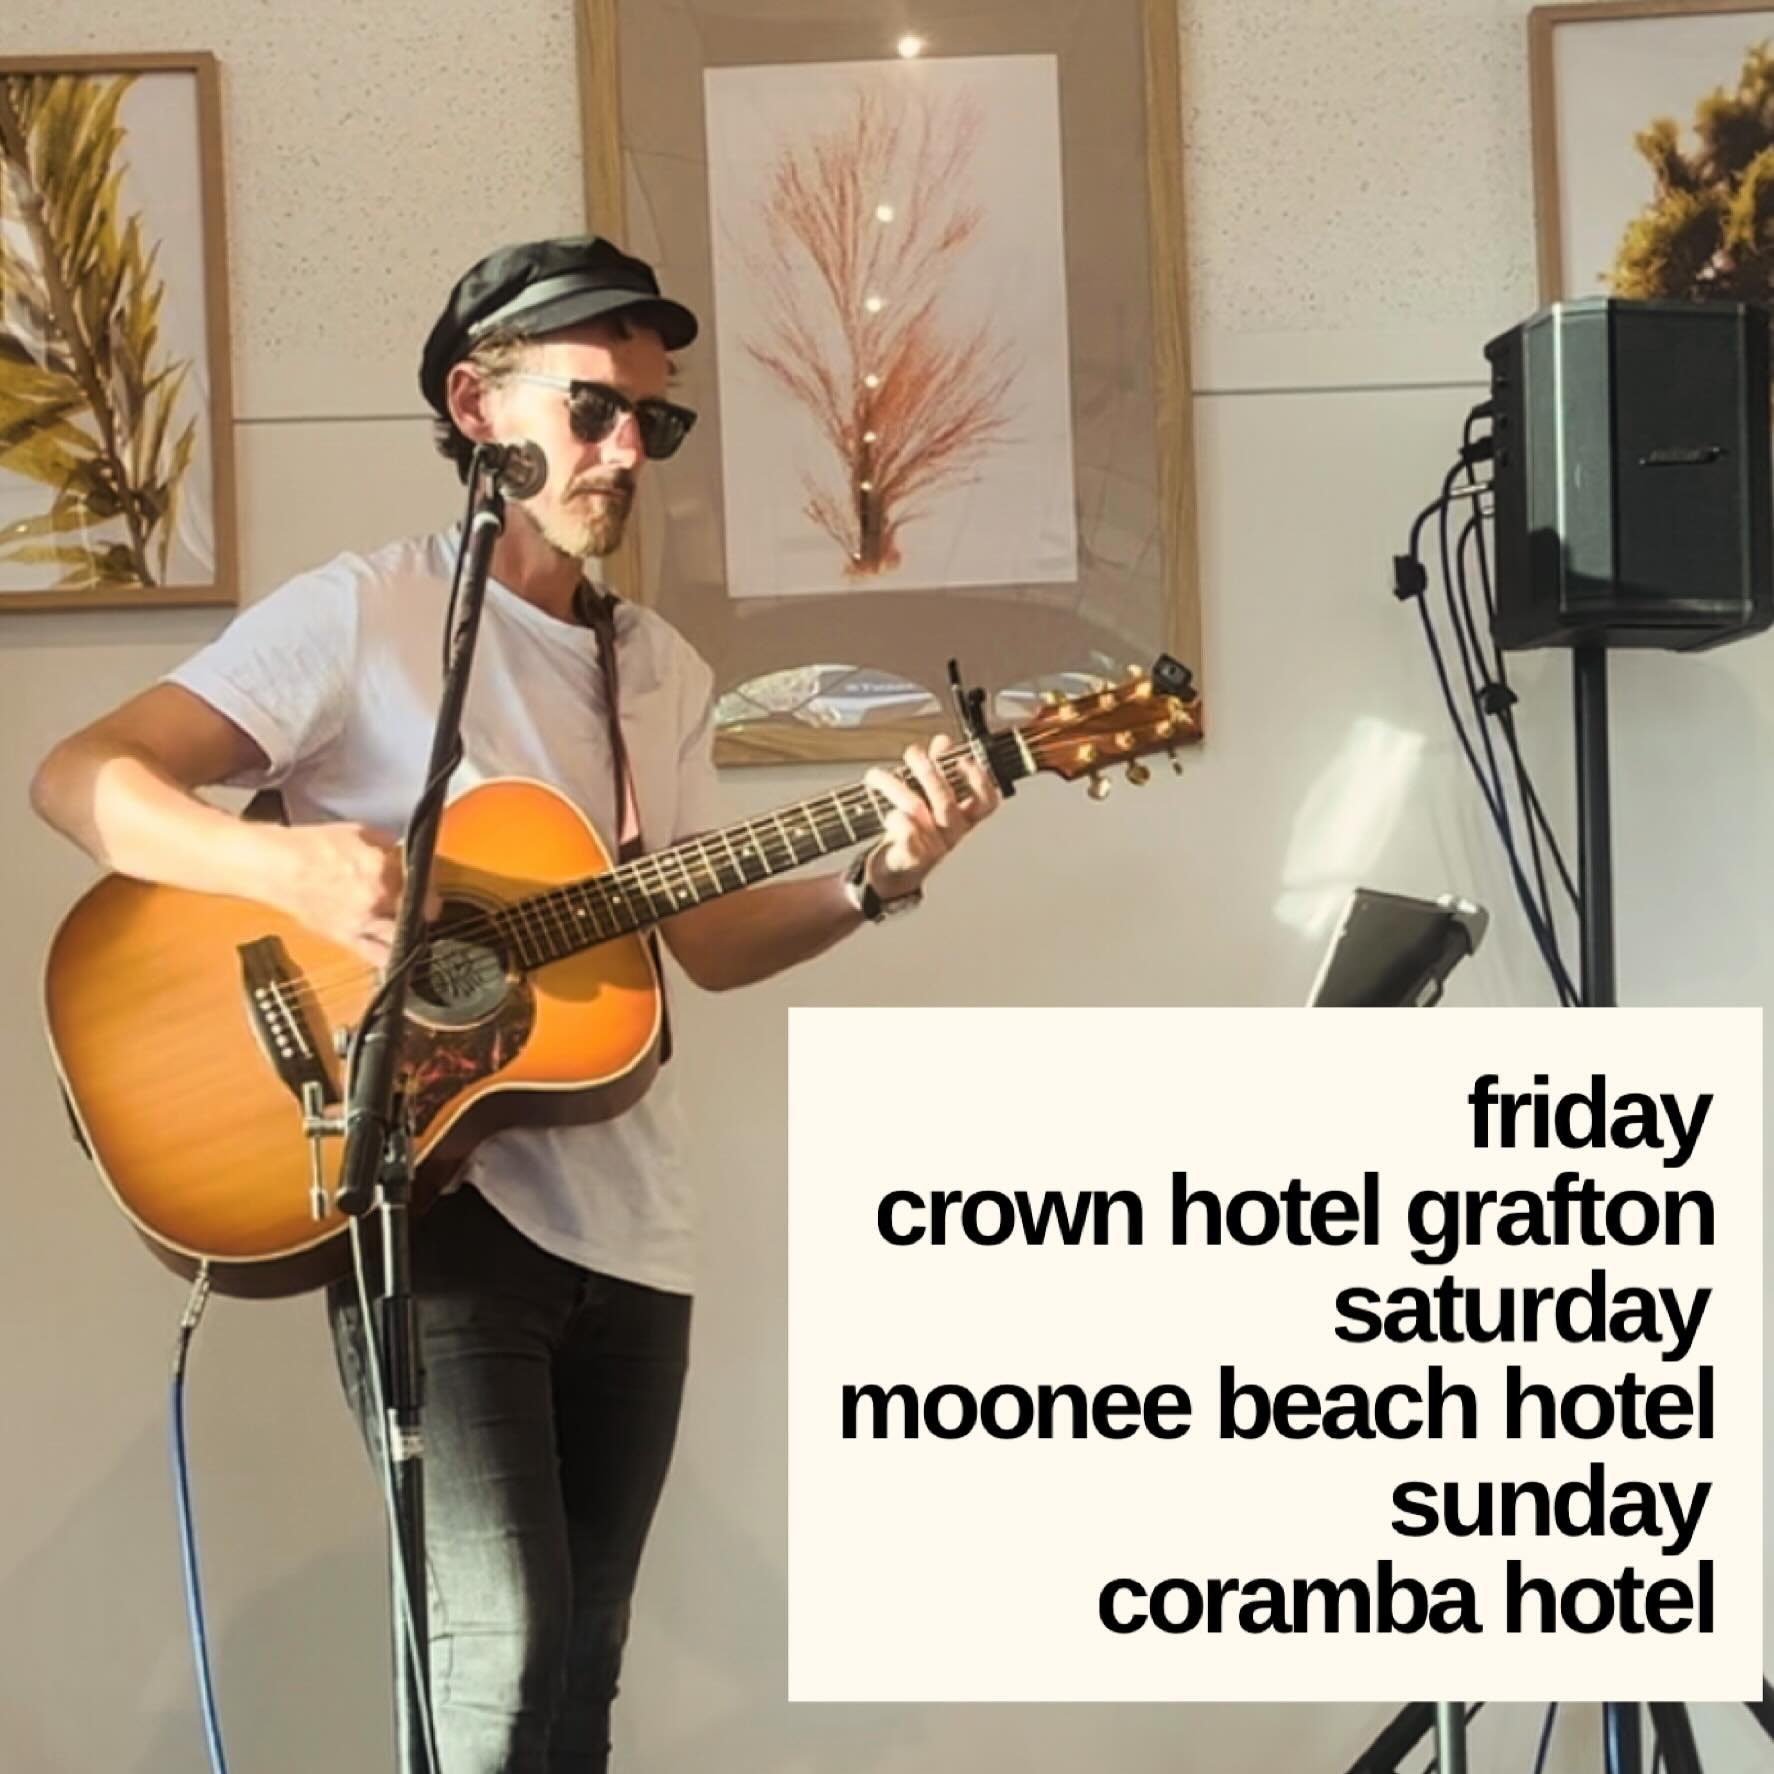 This weekend I&rsquo;m making a trip down south for some shows around #Grafton and the #coffscoastnsw on behalf of the good folk at @offbeatoperations 🎼✨

Friday at the @crownhotelmotelgrafton from 5:30pm 👑✨

Saturday at the @mooneebeachhotel from 